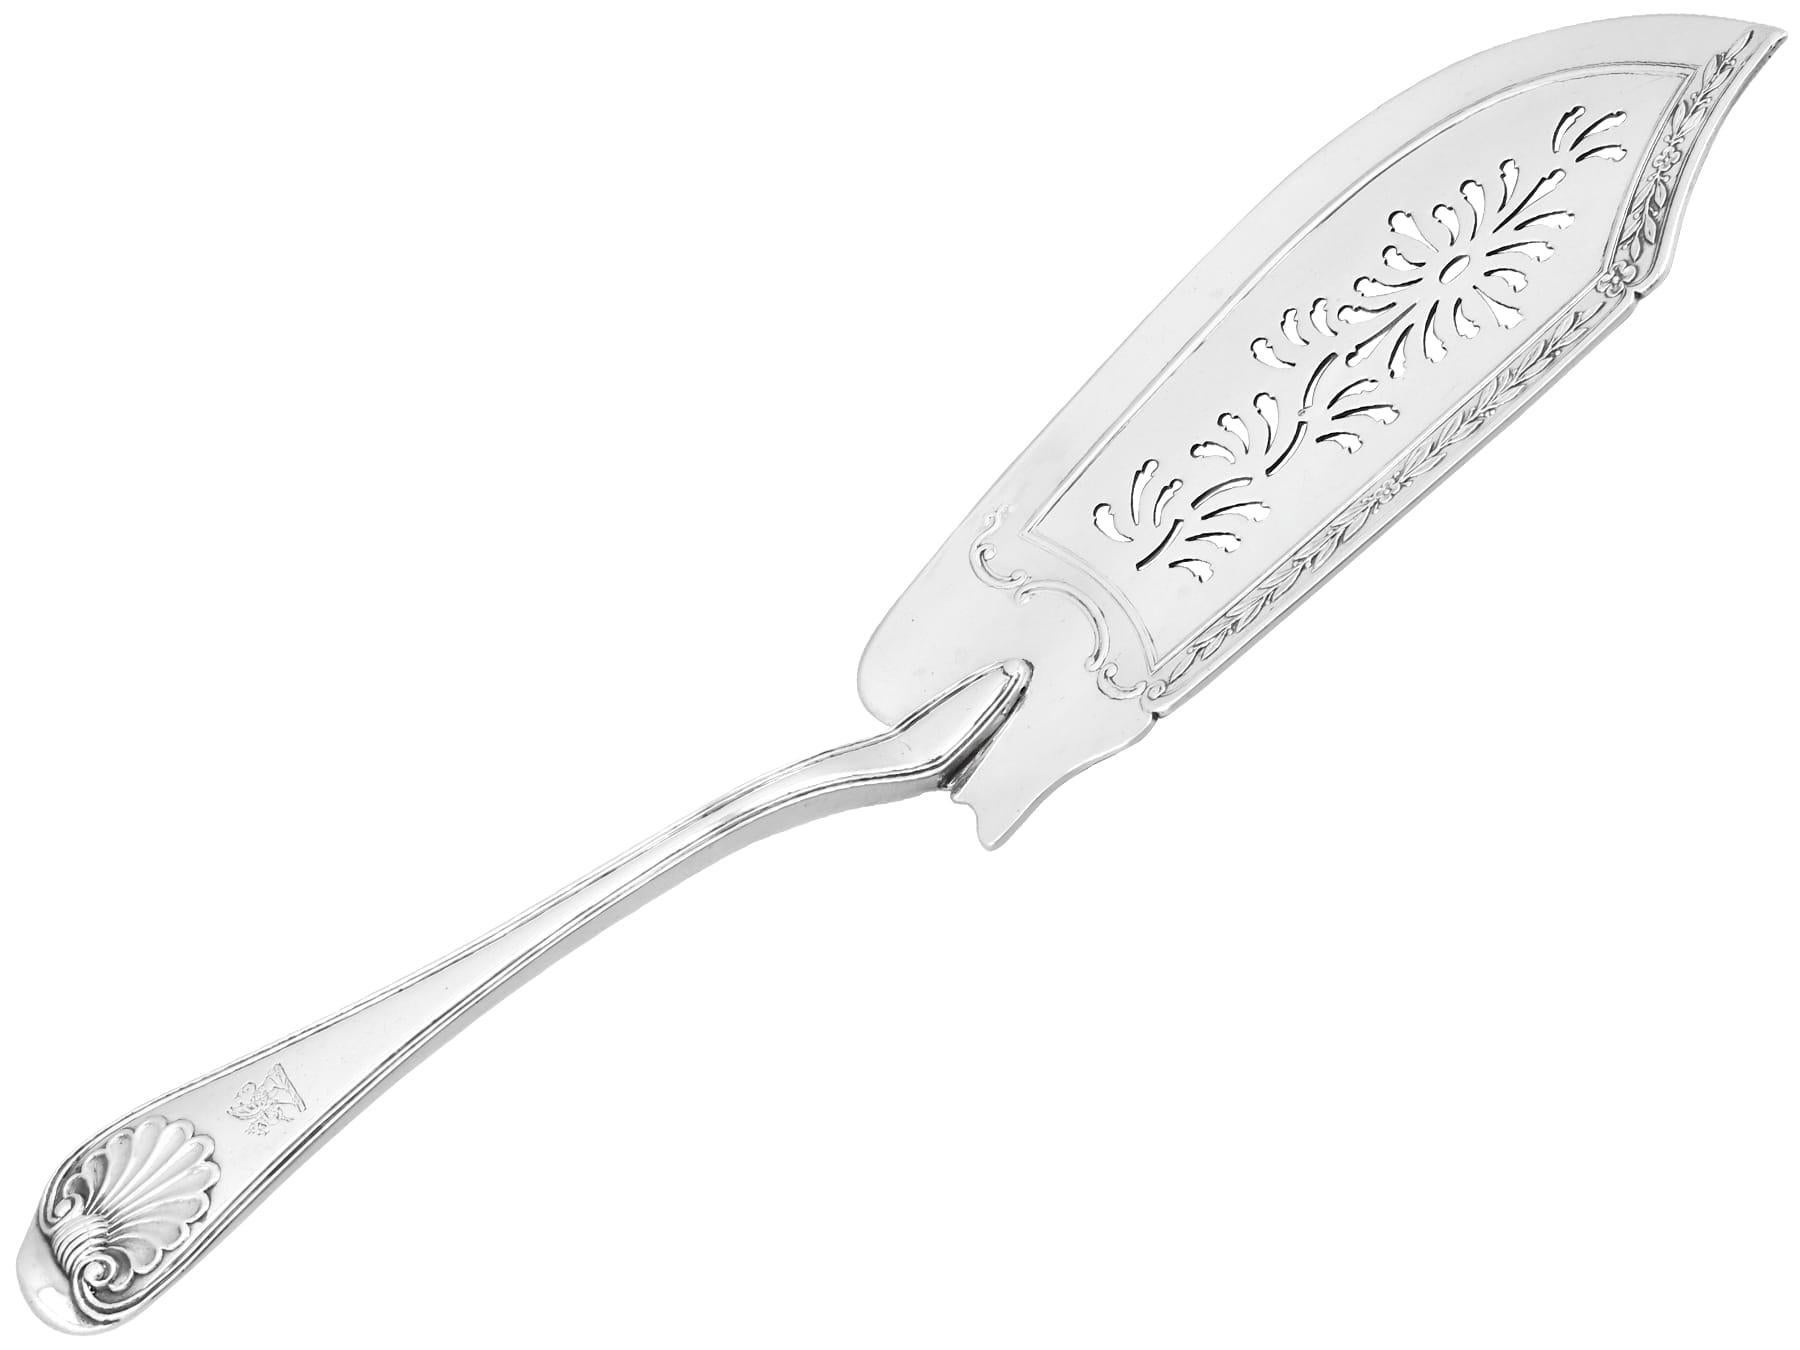 An exceptional, fine and impressive, rare antique Georgian English sterling silver Old English Thread and Shell fish slice / server made by Paul Storr; an addition to our silver flatware collection.

This exceptional antique George III sterling